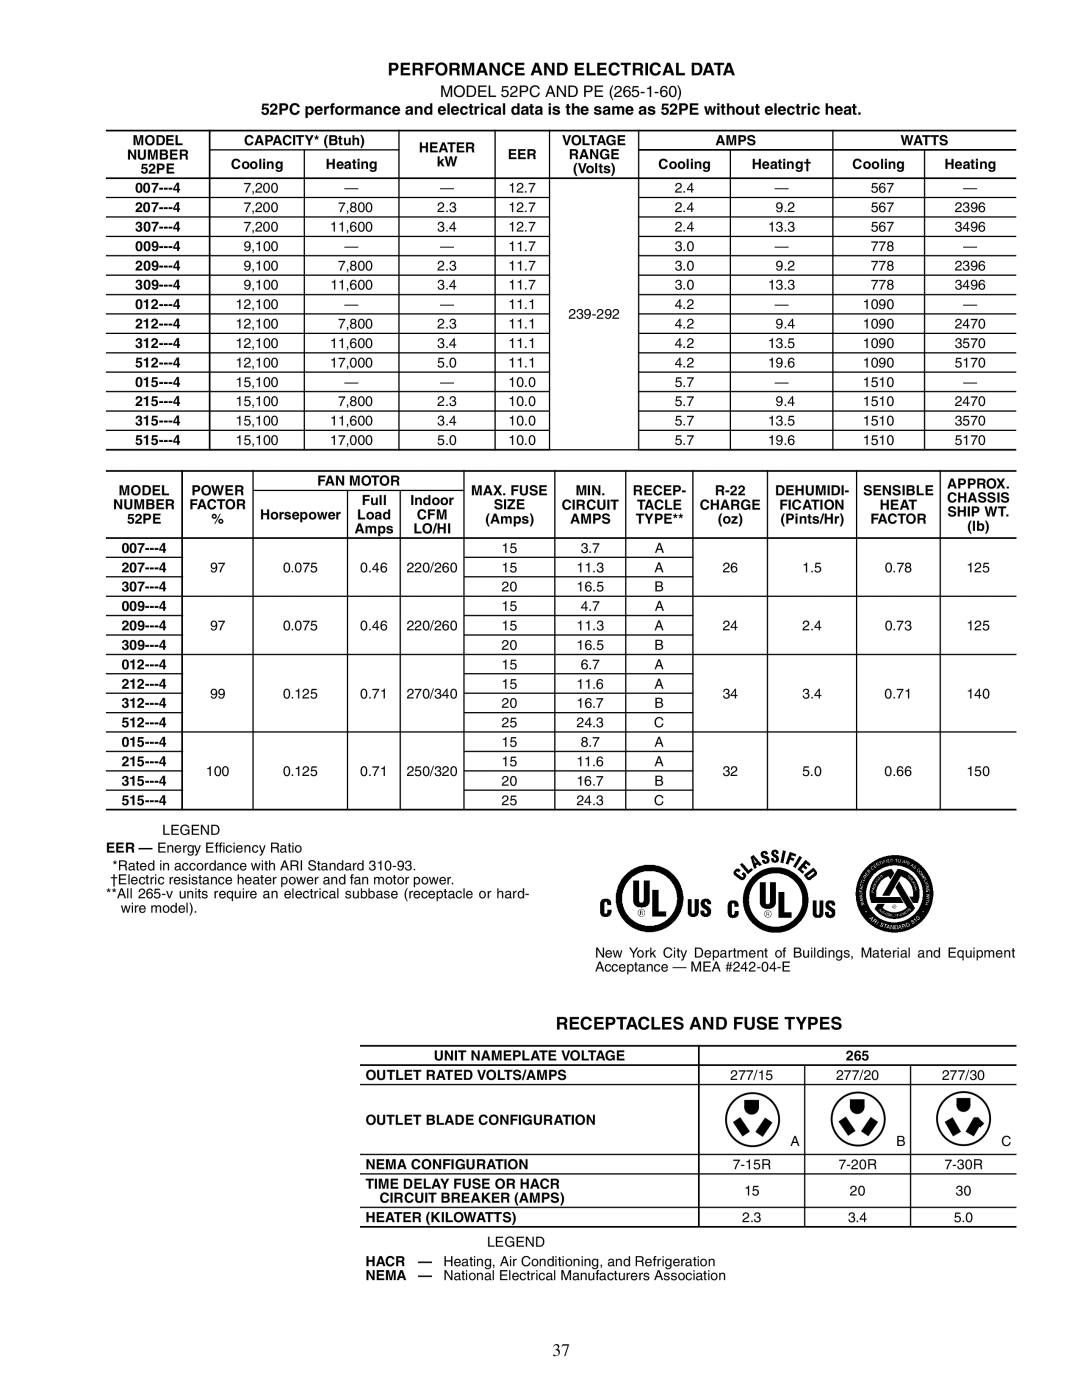 Carrier 592-085 warranty Performance And Electrical Data, Receptacles And Fuse Types, MODEL 52PC AND PE 